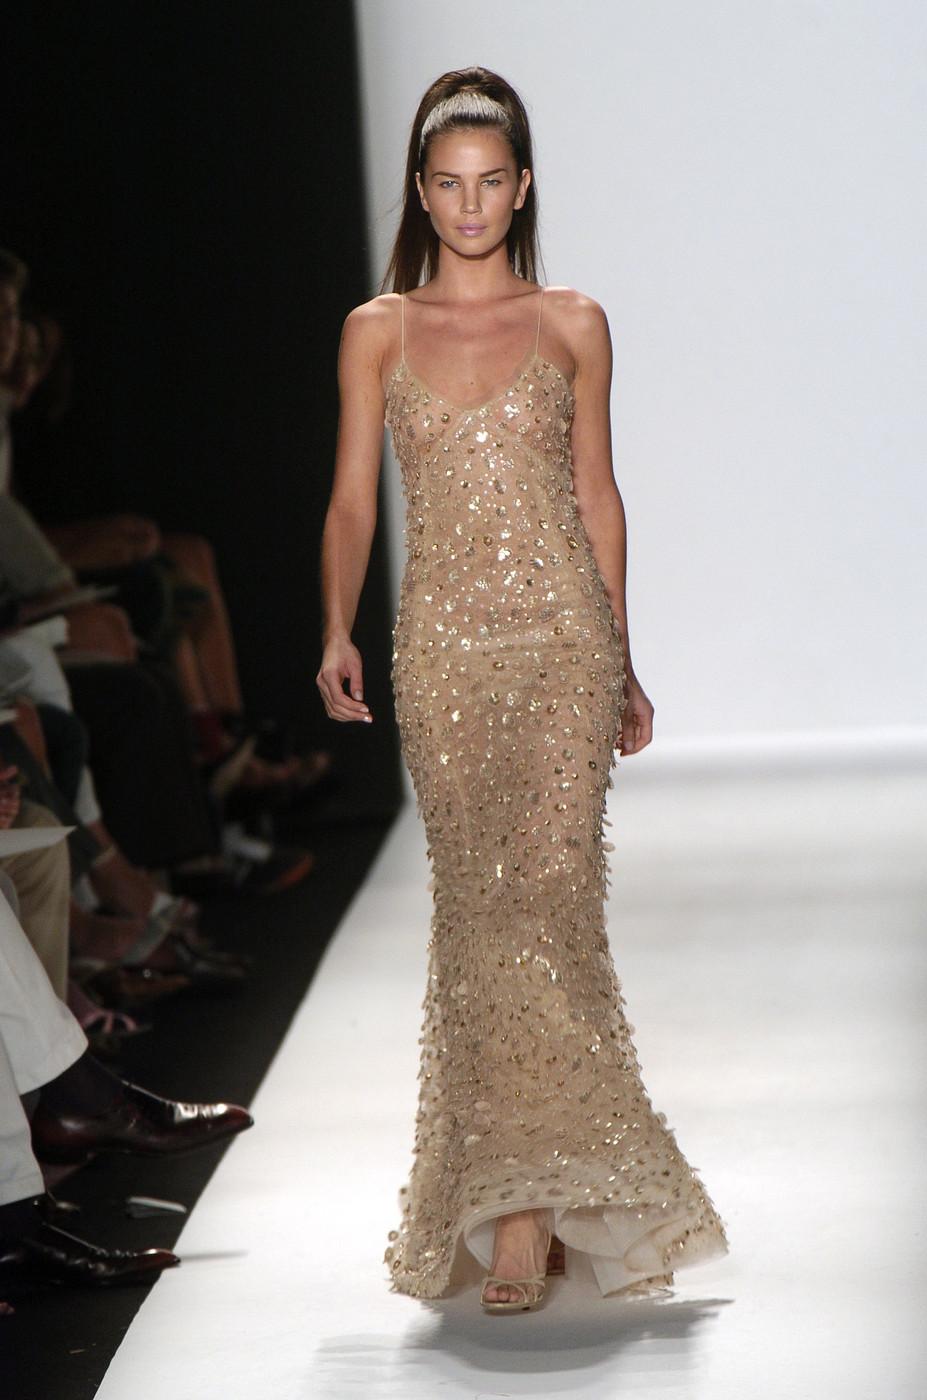 New Oscar de la Renta Nude Sequin Embellished Dress Gown
S/S 2006 Runway Collection
USA size 8
Same dress was worn by Mischa Barton in the 57th Emmy Awards, September 2006.
Nominated by Vogue magazine as the best Emmy Awards dress.
Measurements: